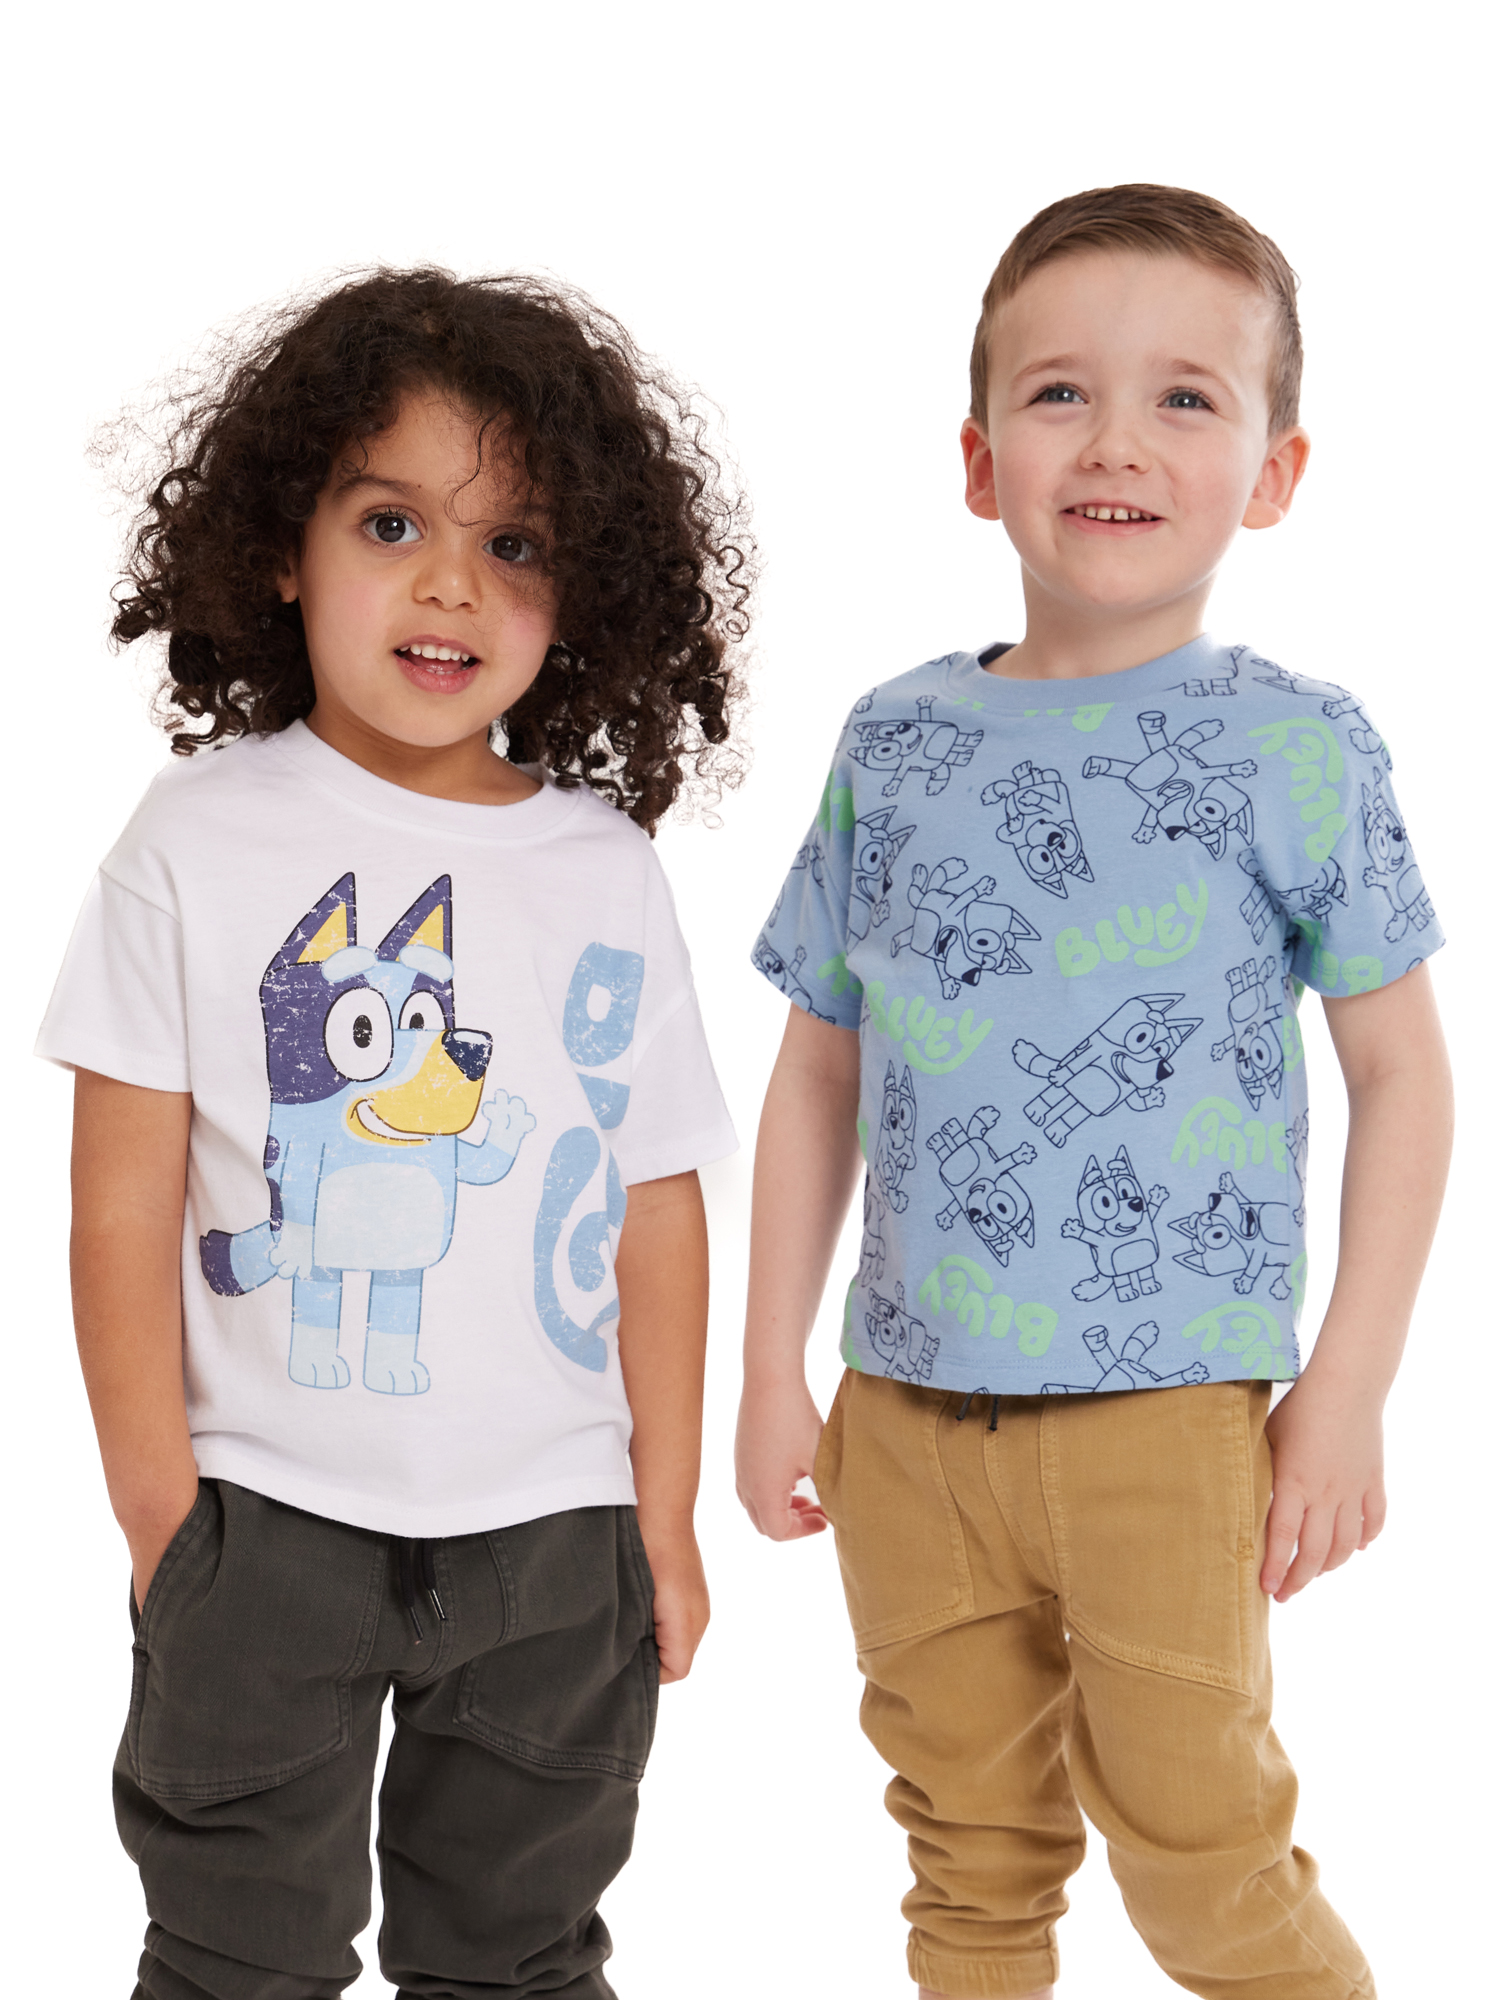 Bluey Toddler Boy Graphic Tees, 2-Pack, Sizes 2T-5T - image 2 of 7